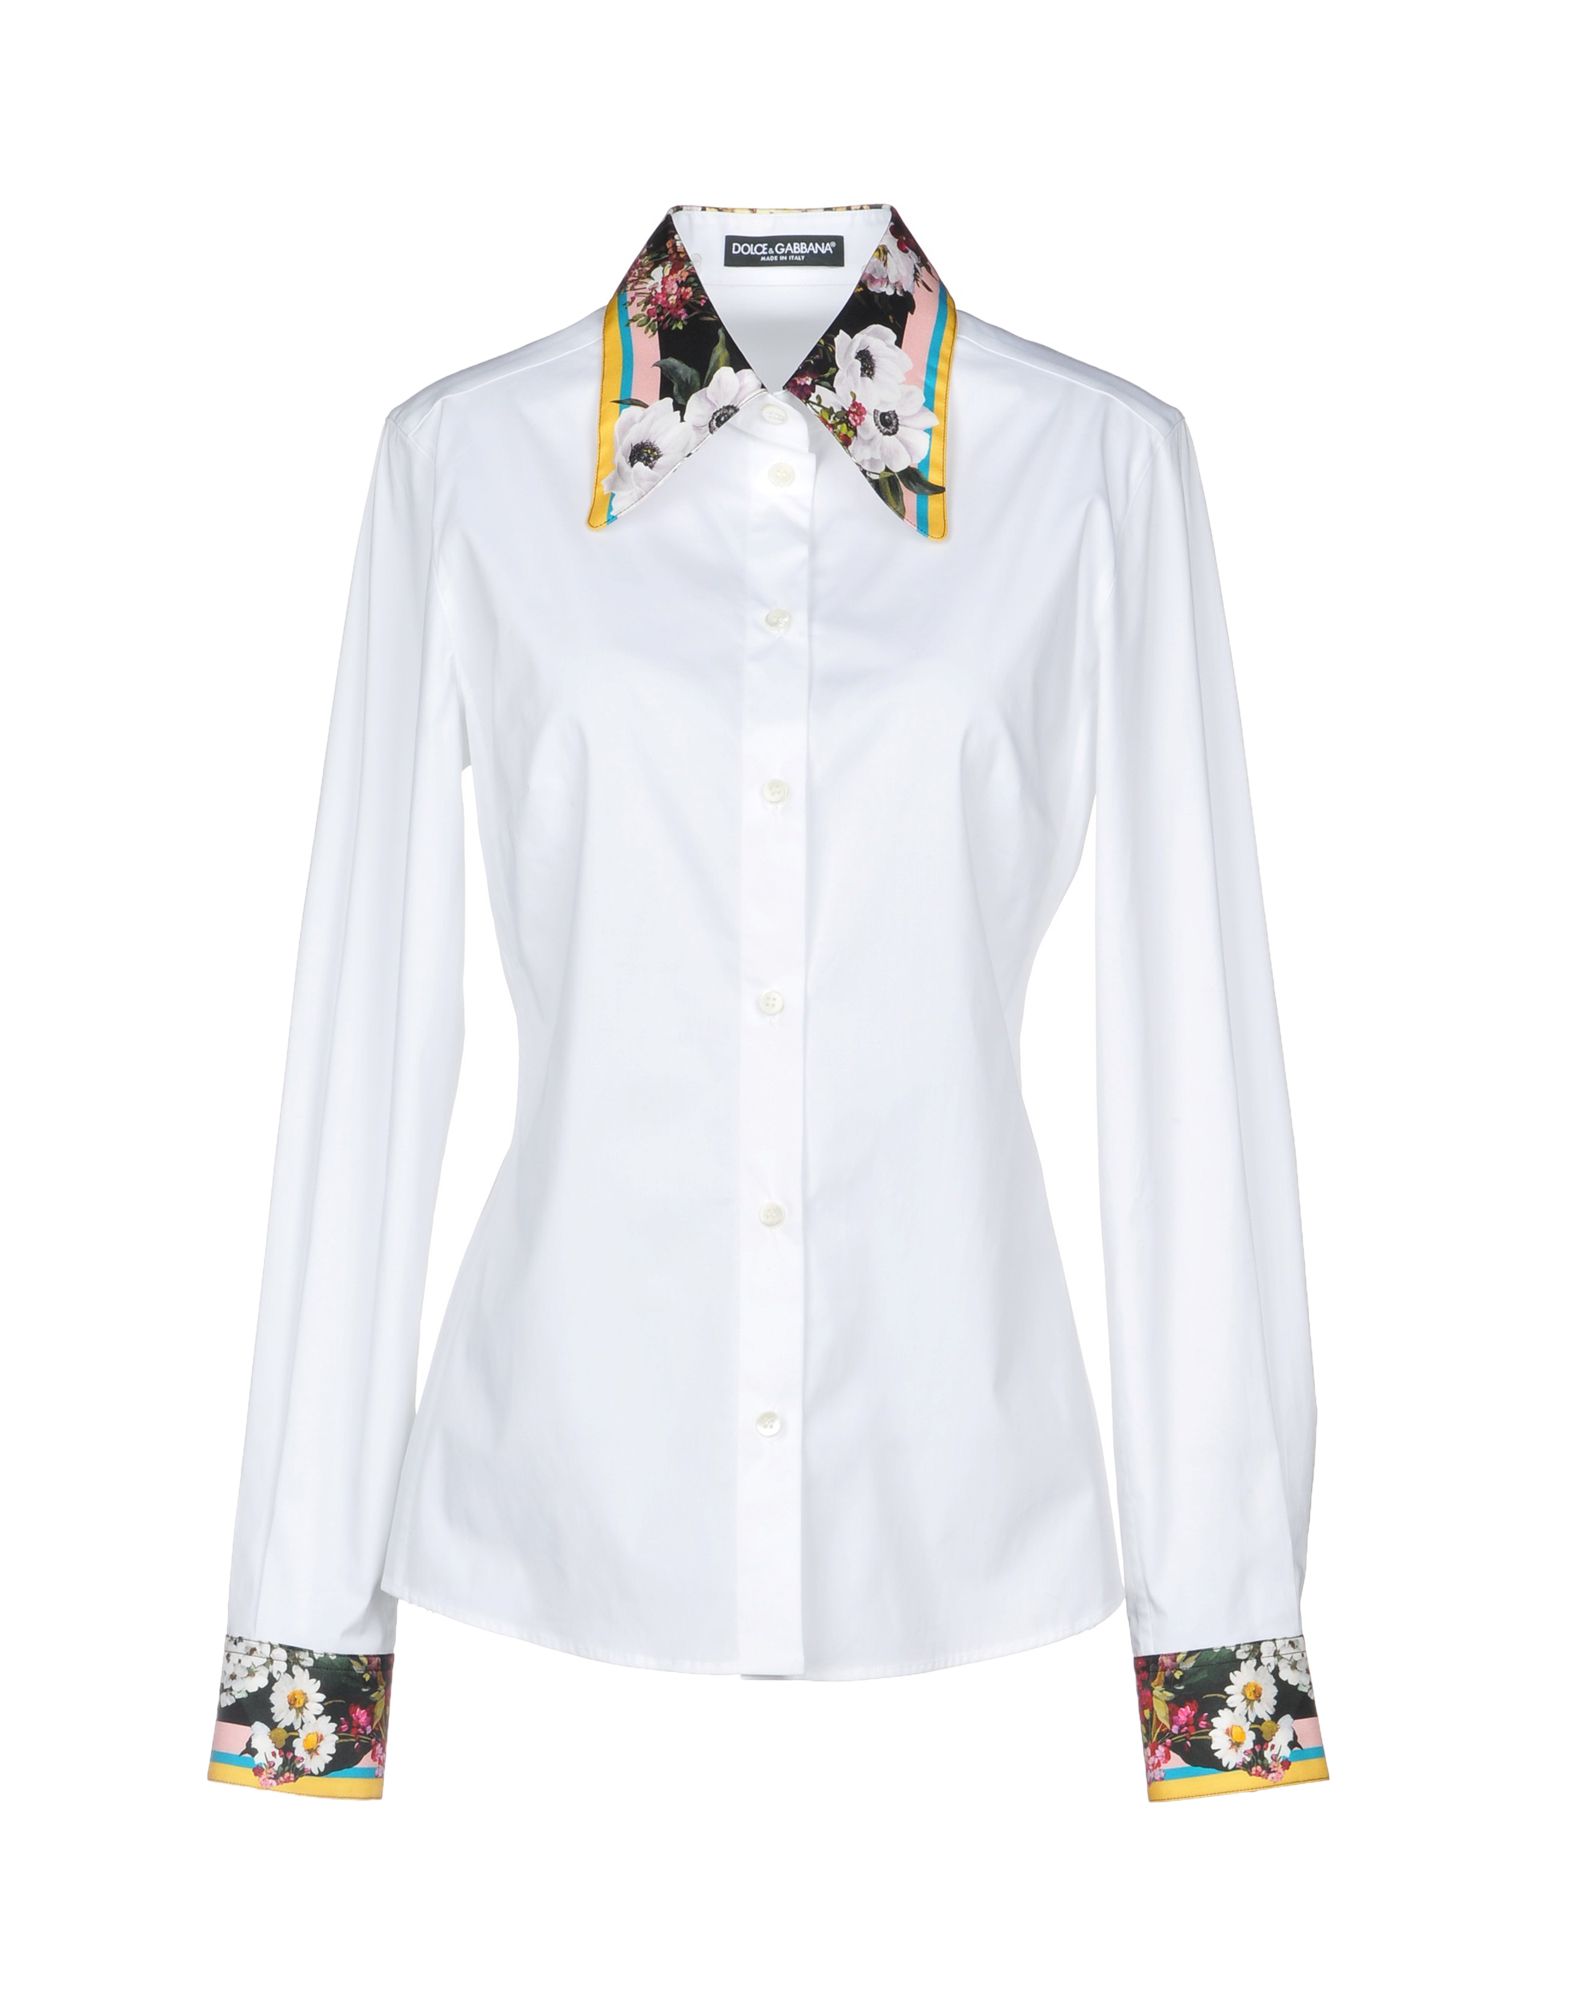 DOLCE & GABBANA Solid color shirts & blouses,38752147FG 4